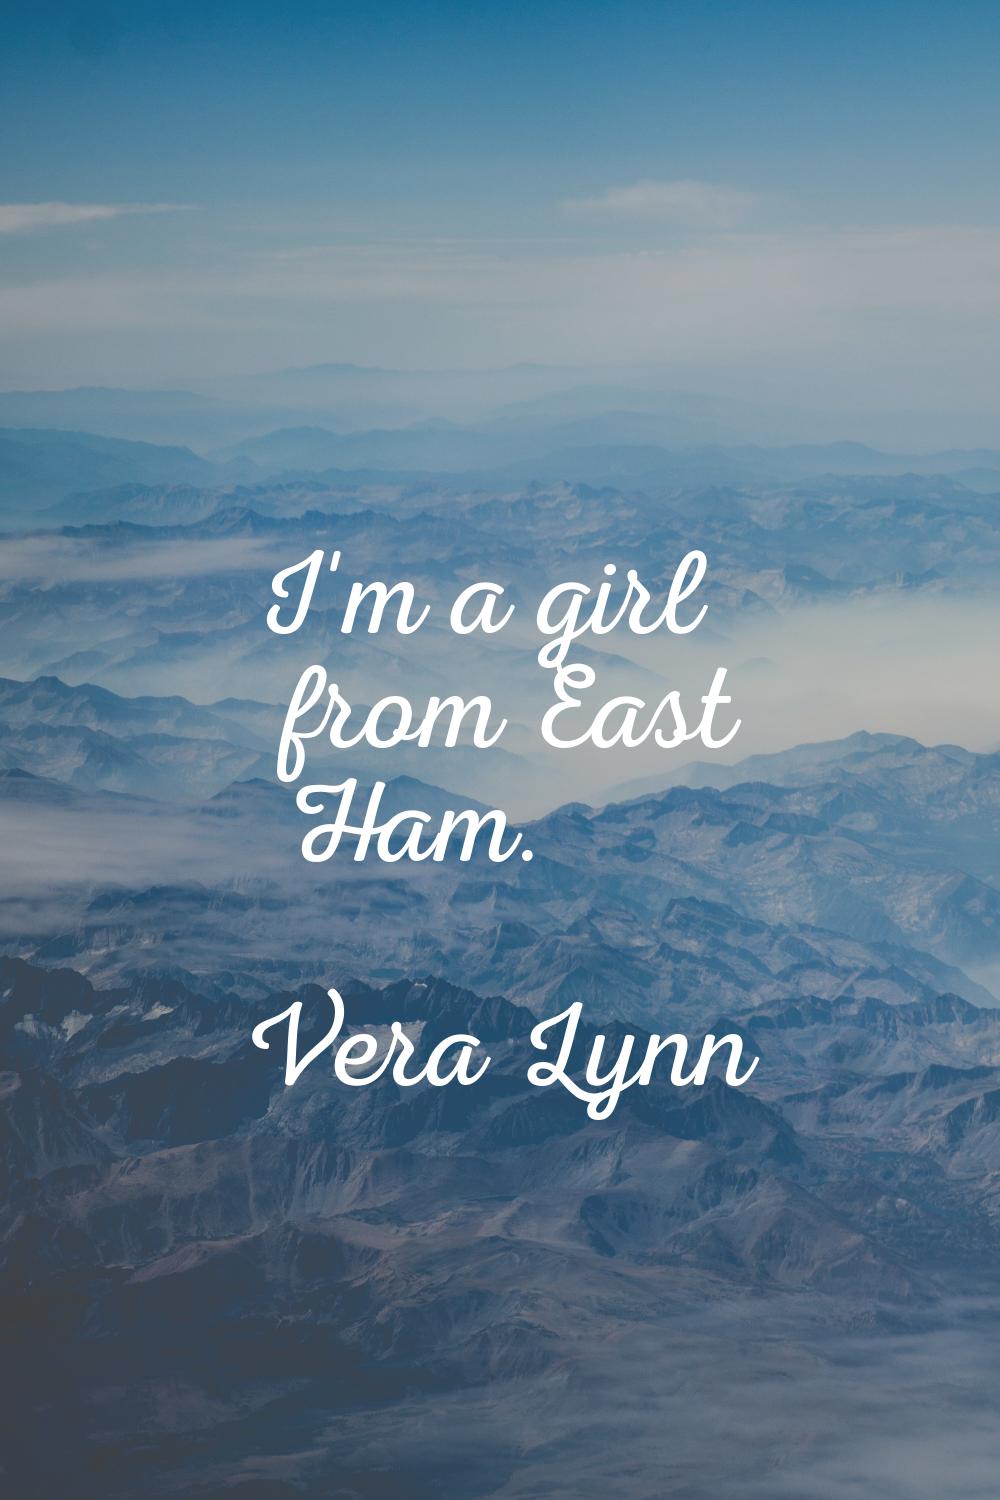 I'm a girl from East Ham.